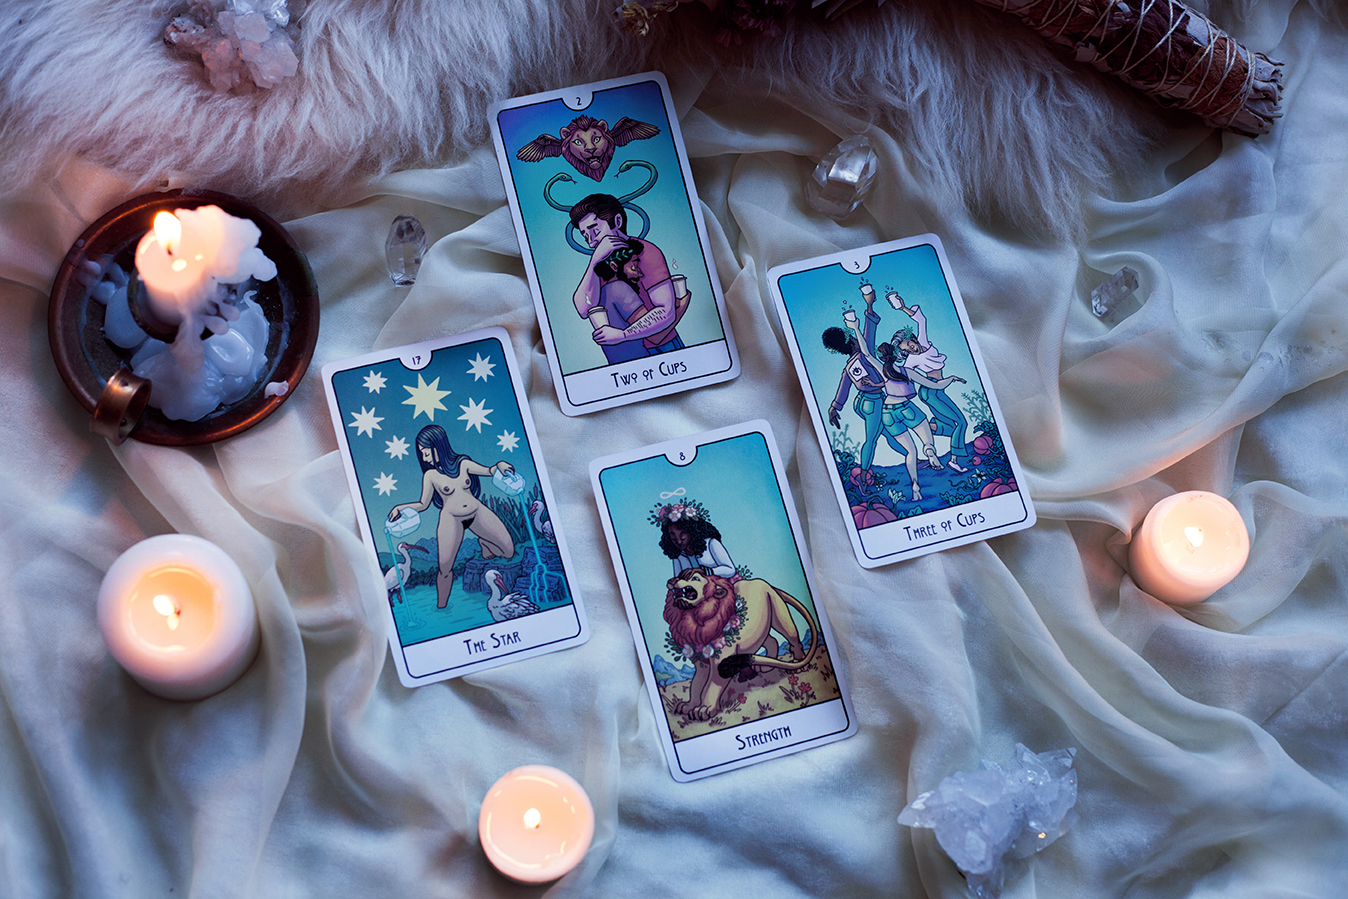  Image shows four cards surrounded by dried flowers add candles. The cards are the Star, Strength, the Two of Cups, and the Three of Cups. First printing. 